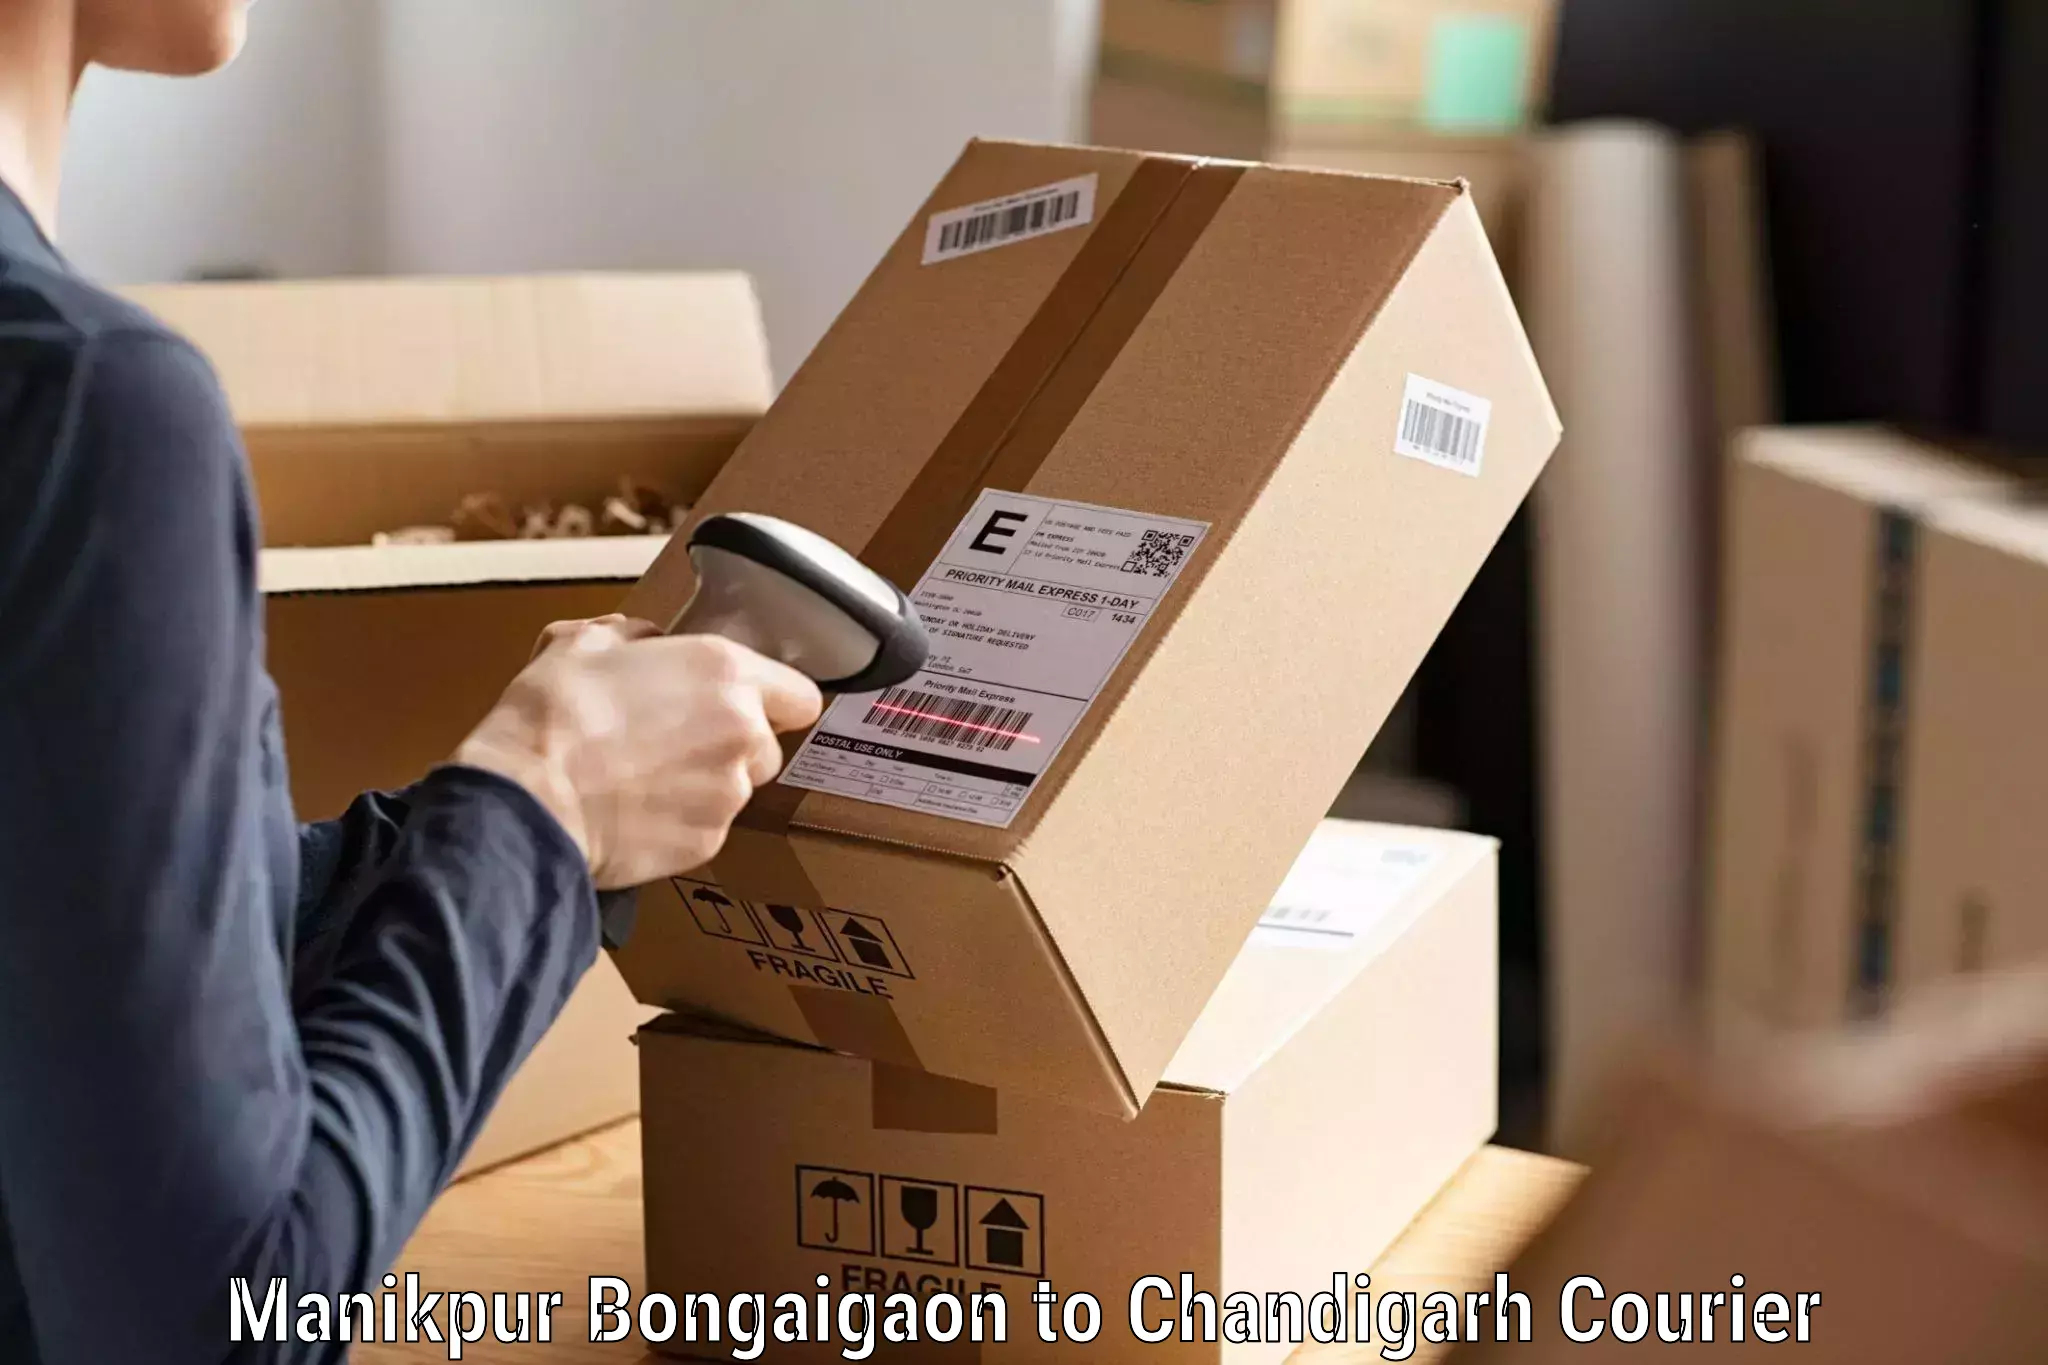 Multi-service courier options Manikpur Bongaigaon to Chandigarh